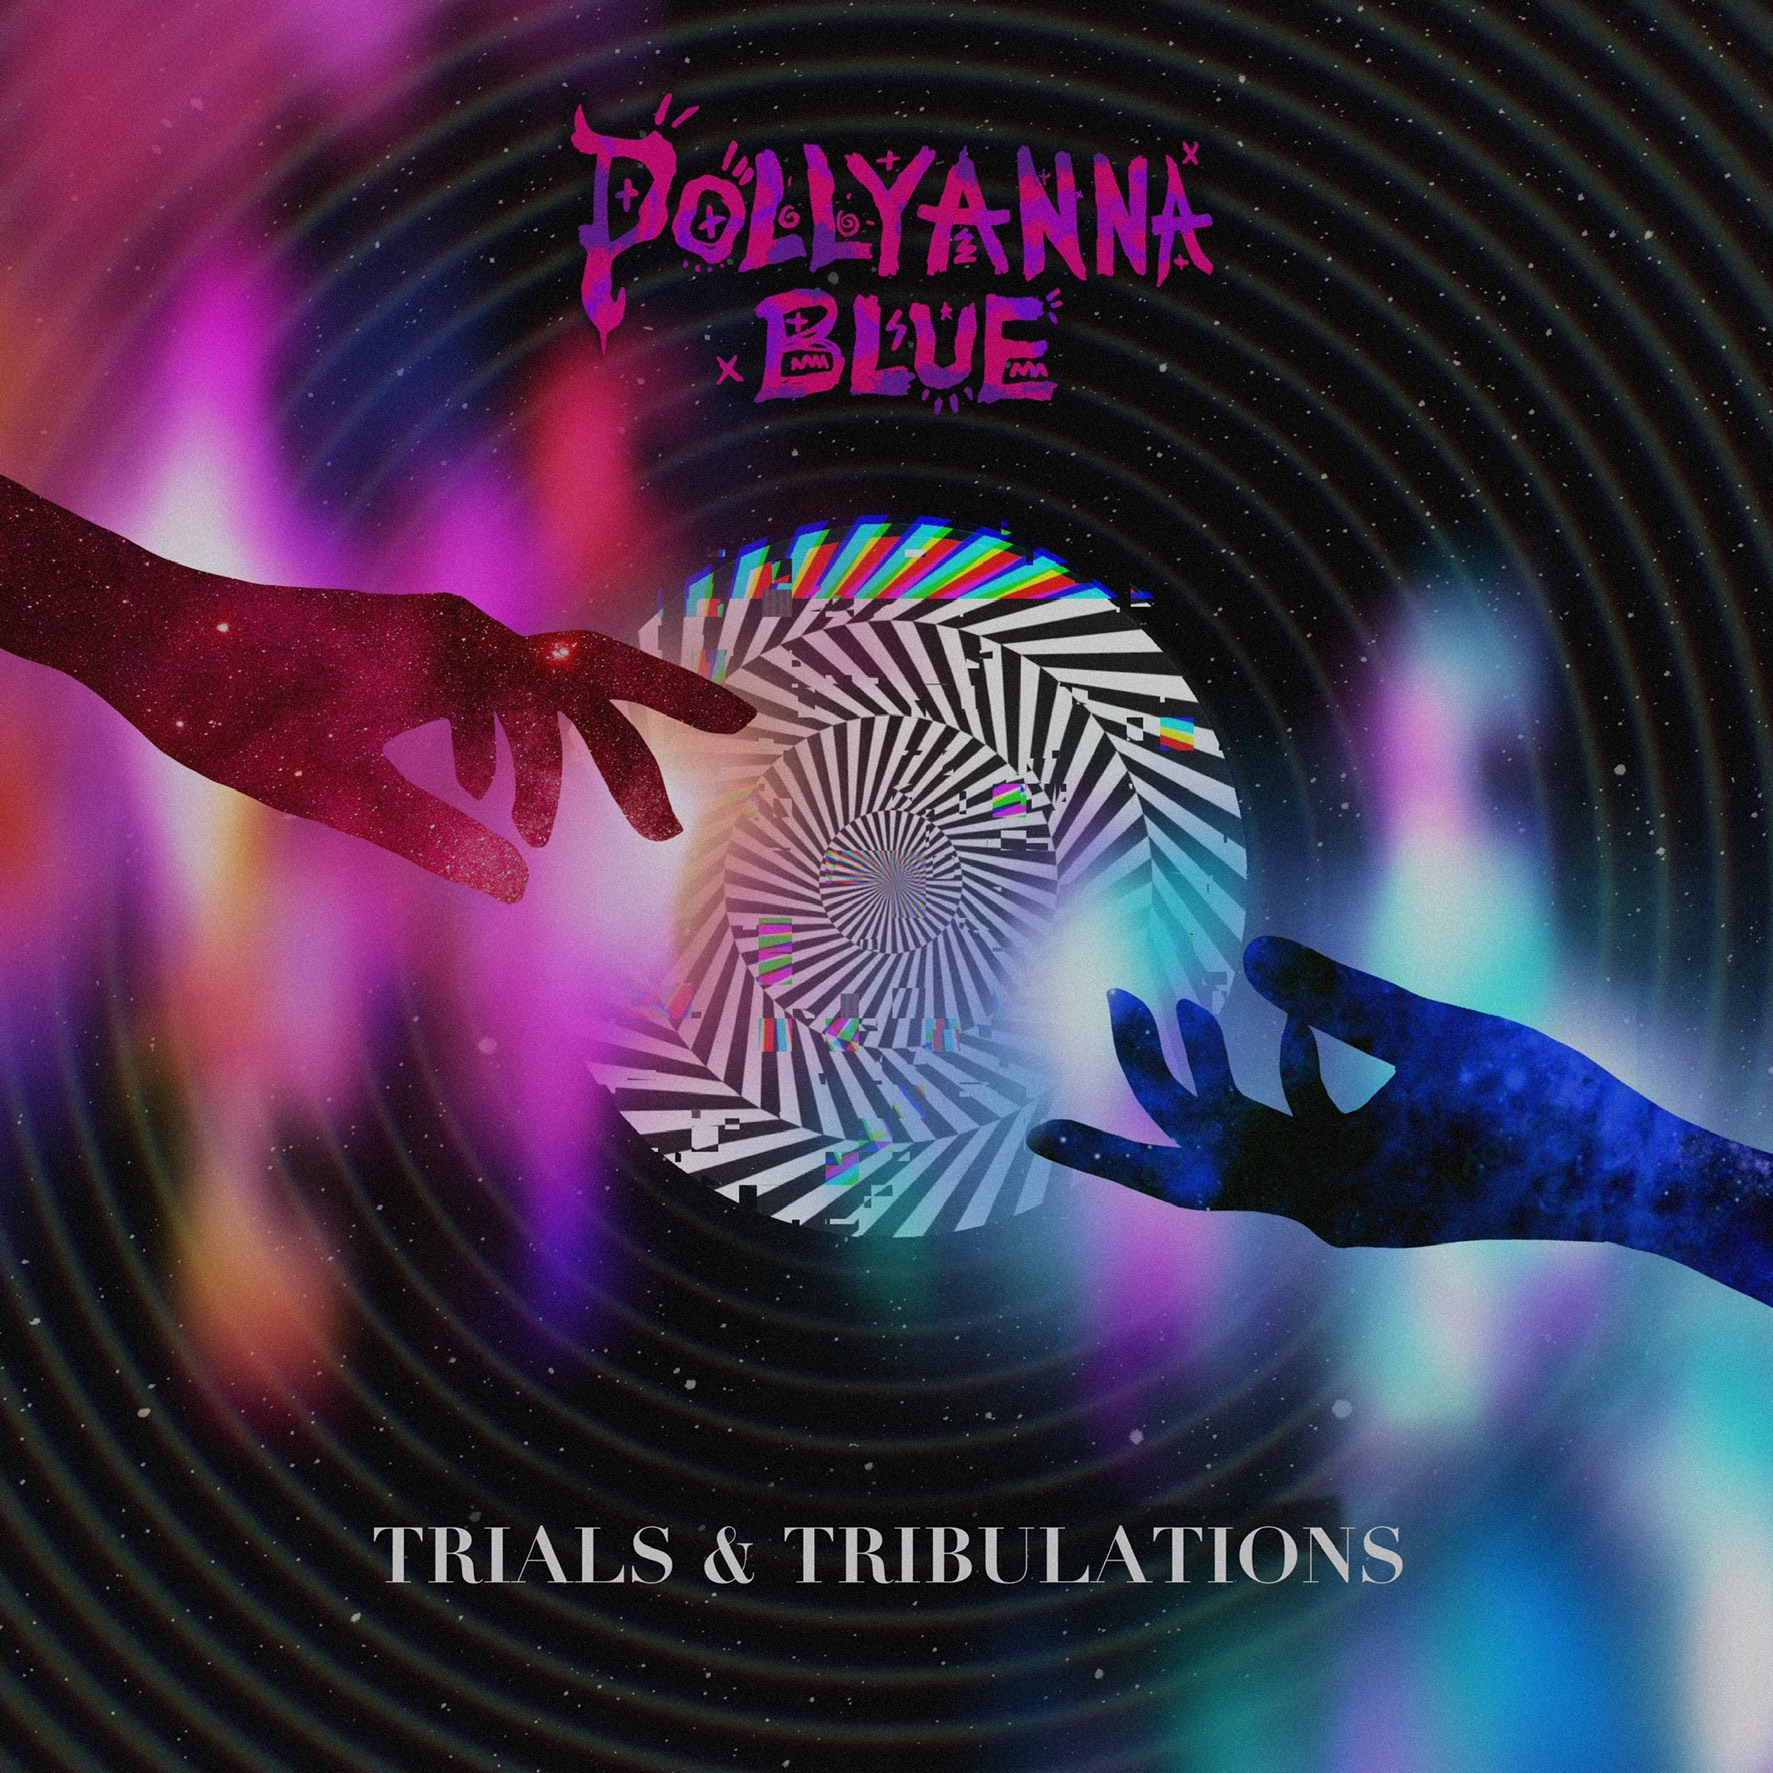 DEBUT EP REVIEW: Trials and Tribulations by Pollyanna Blue